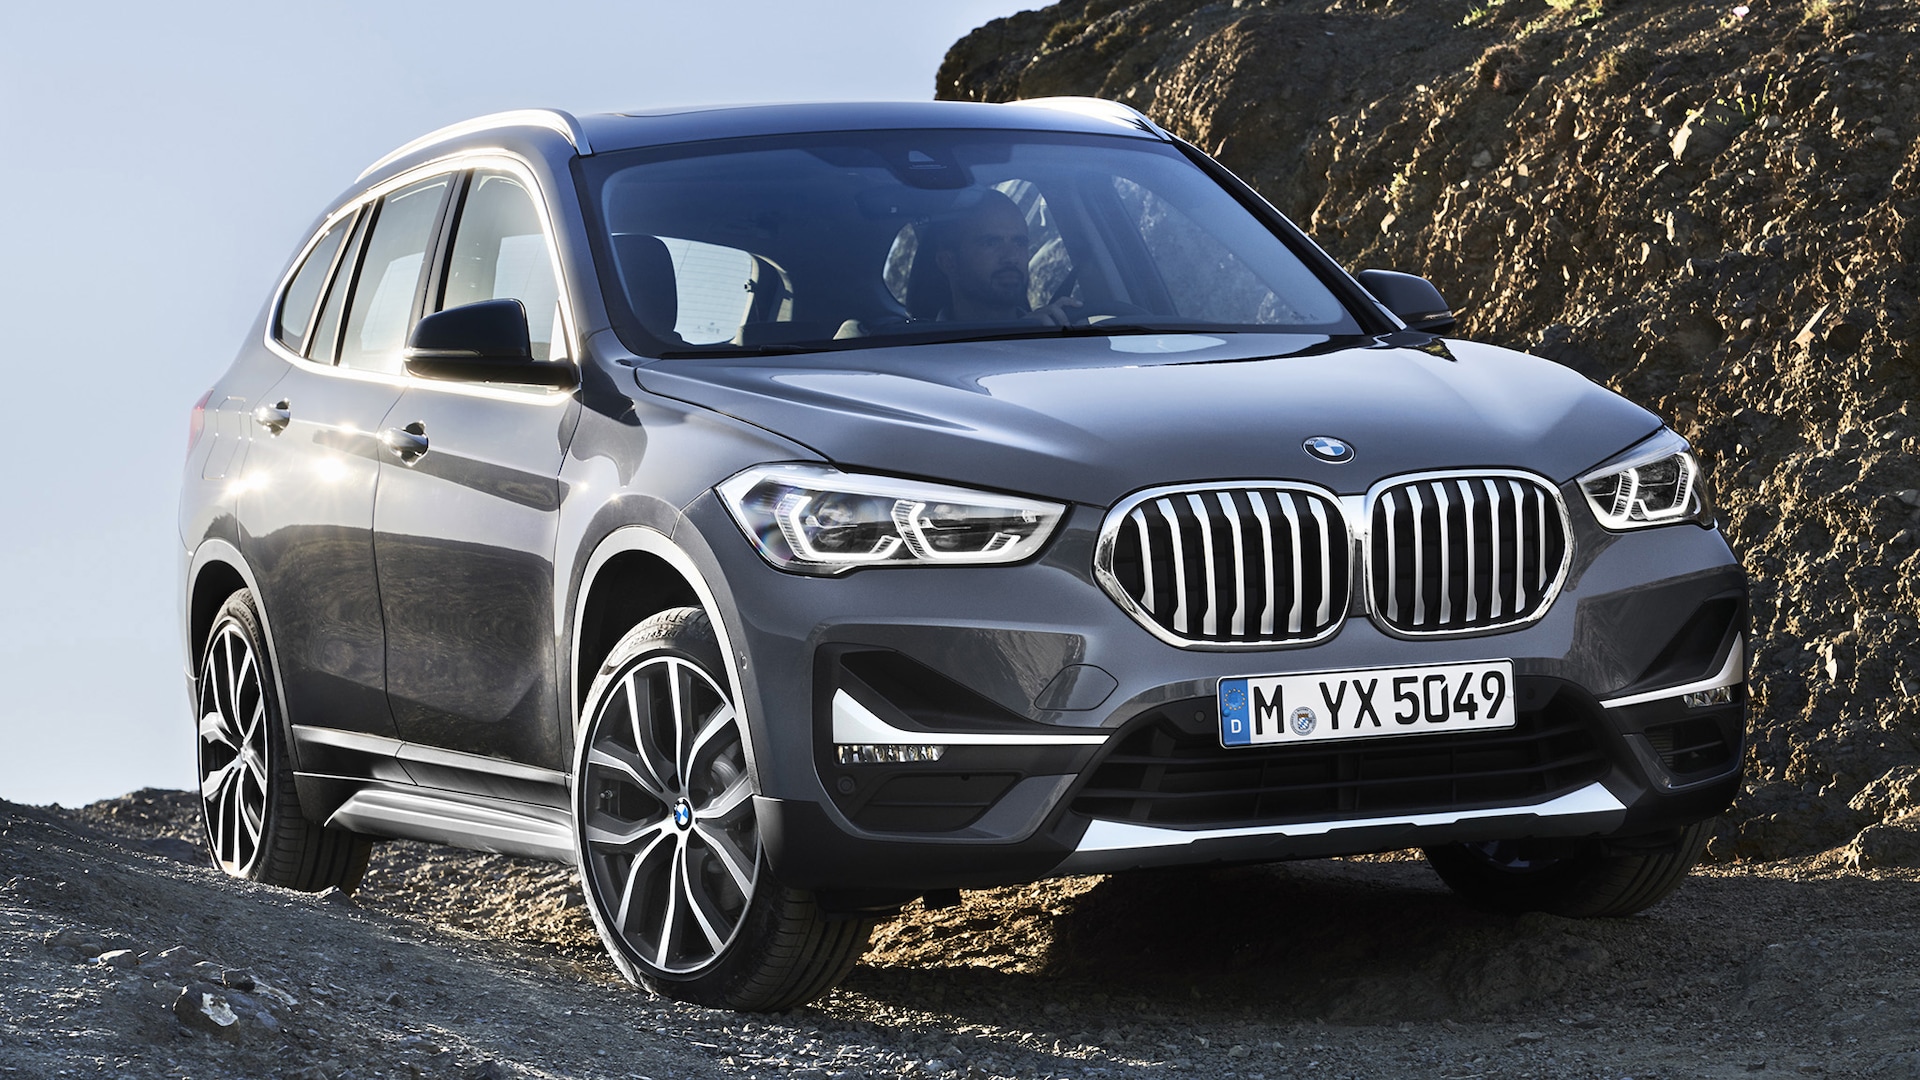 2022 BMW X1 Prices, Reviews, and Photos - MotorTrend